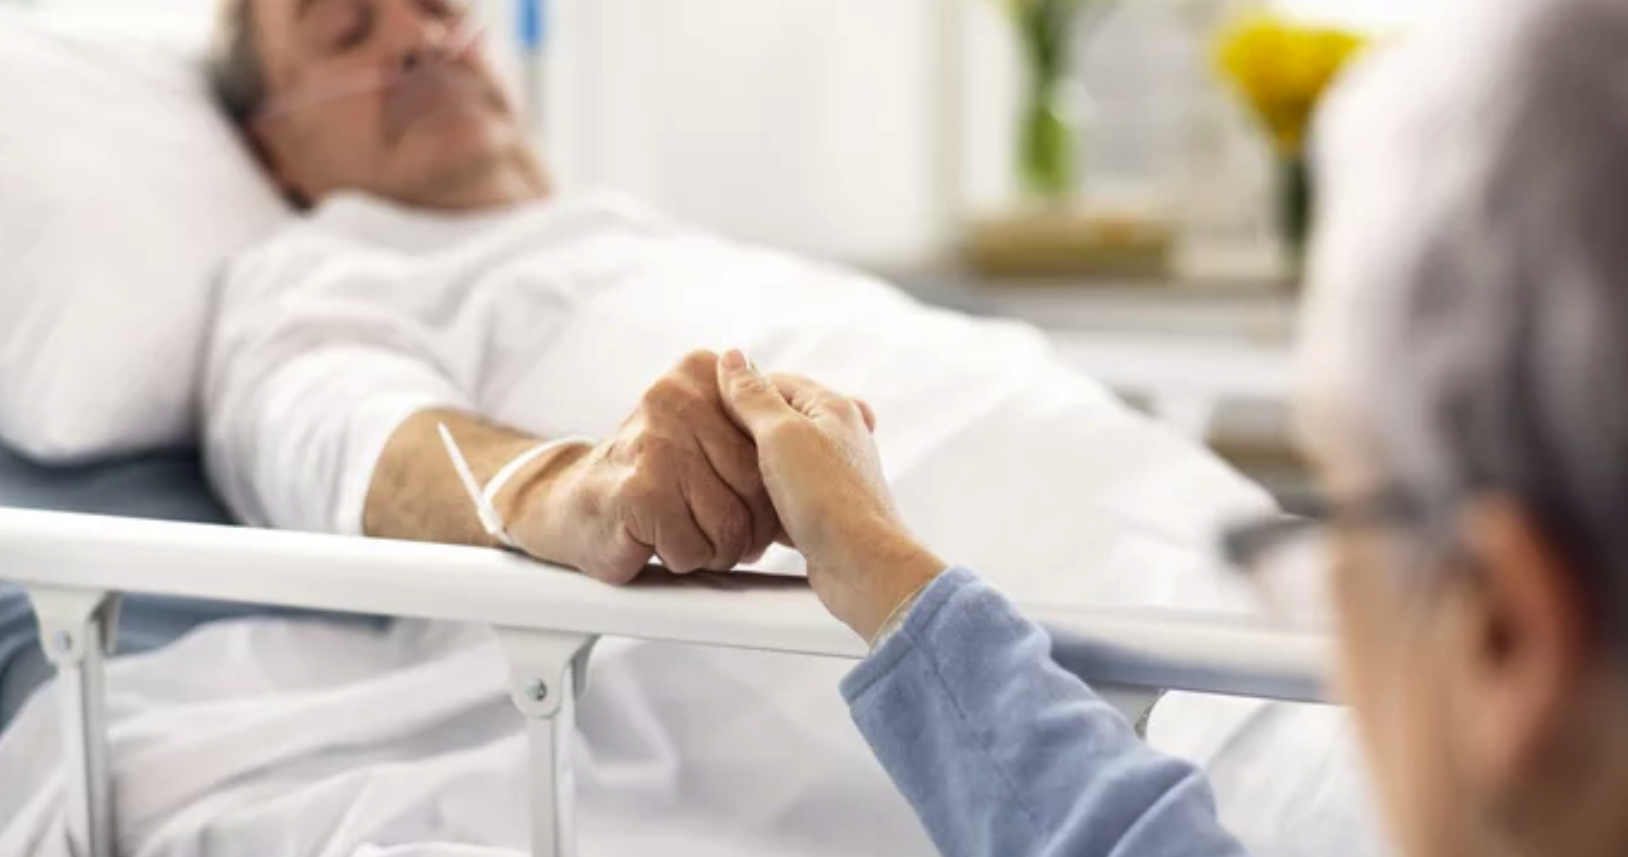 Two people holding hands, one lying in a hospital bed and the other sitting beside them, offering comfort.